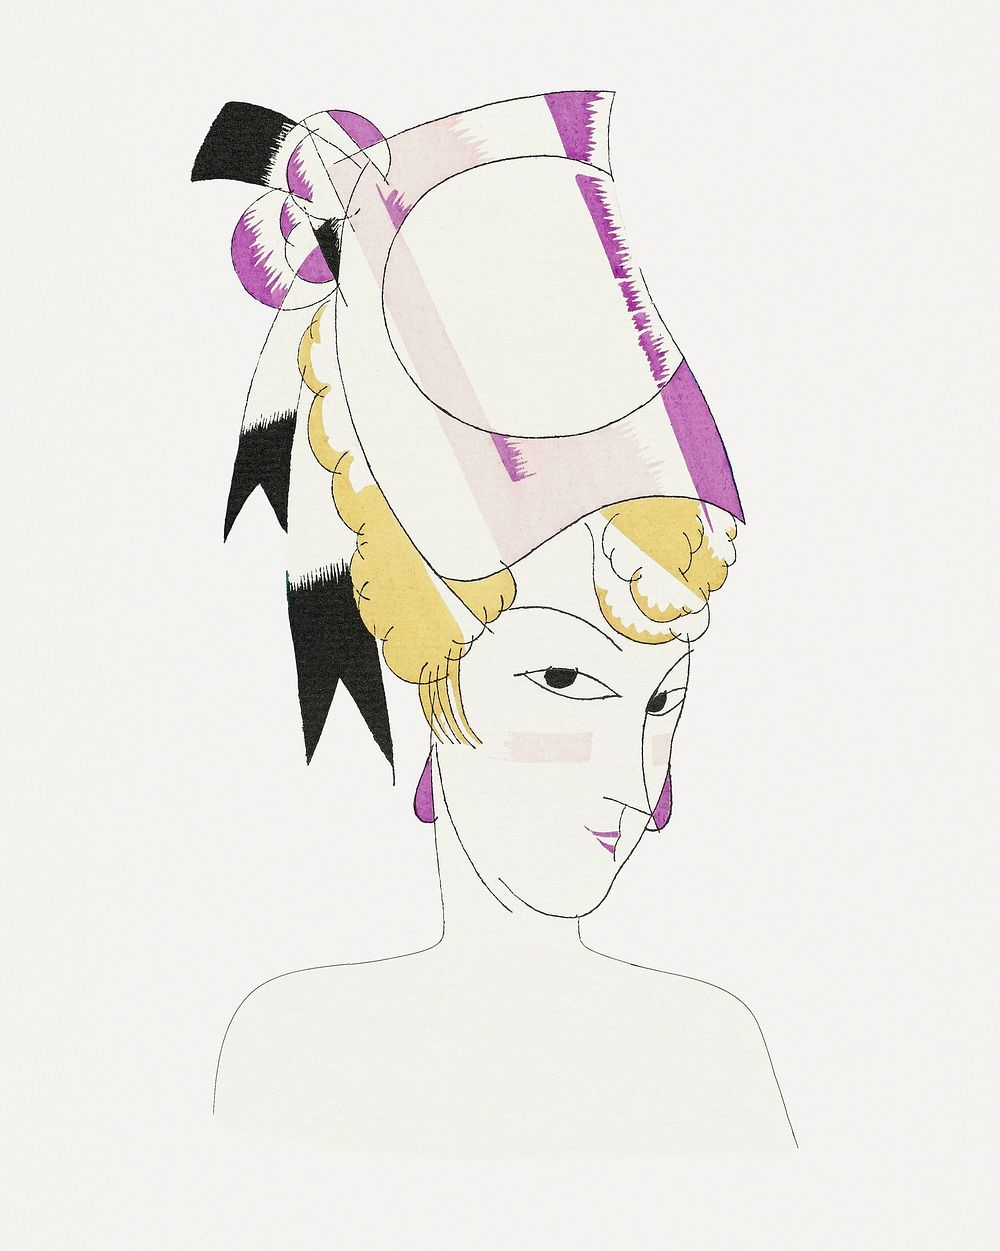 Woman with vintage porcelain hat illustration, remixed from the artworks by Charles Martin